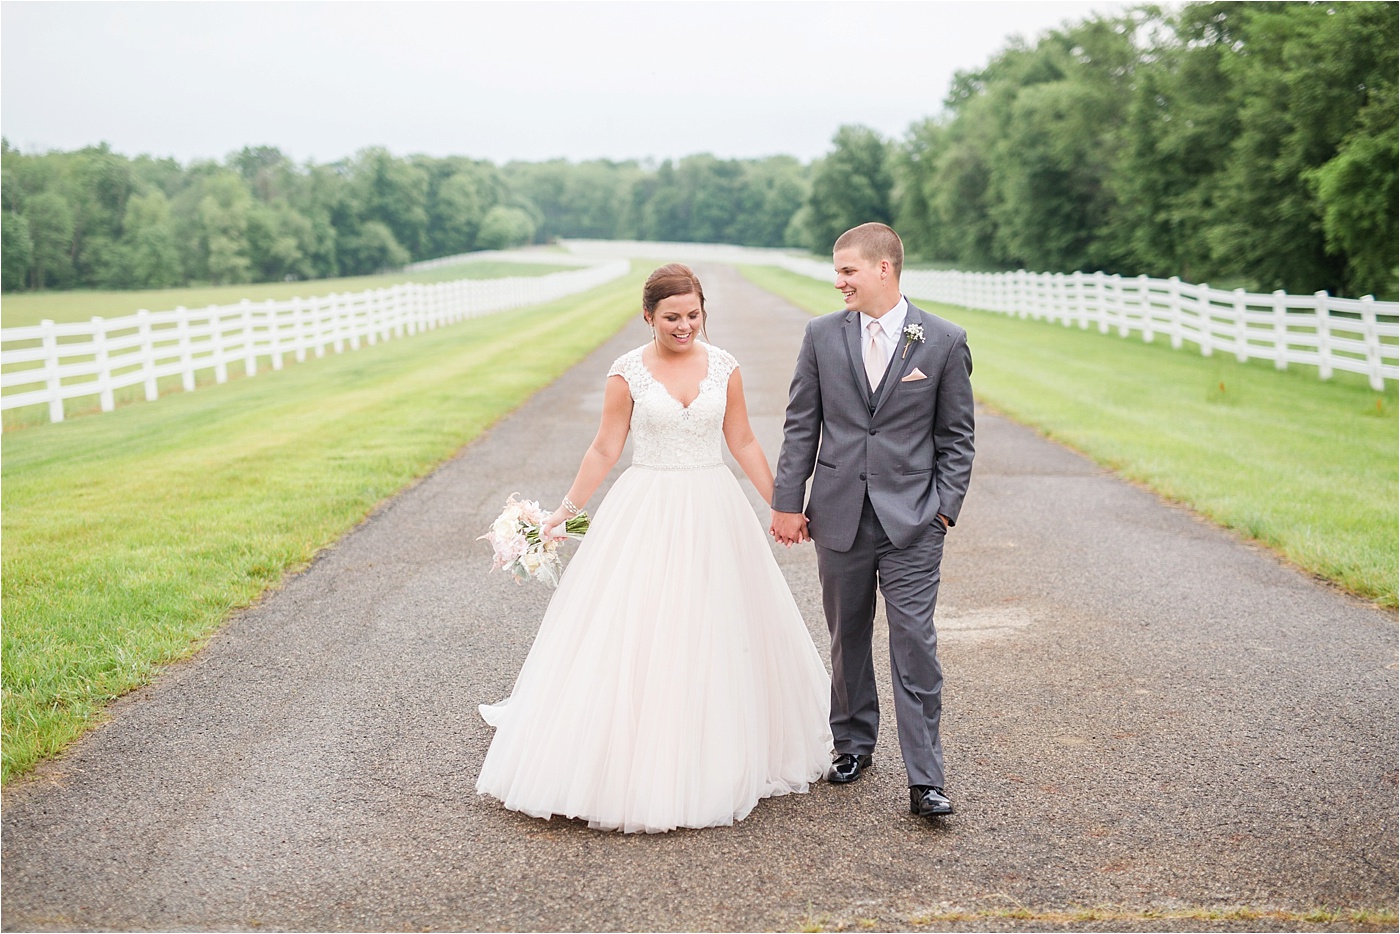 A Blush Outdoor wedding at Irongate Equestrian | KariMe Photography_0149